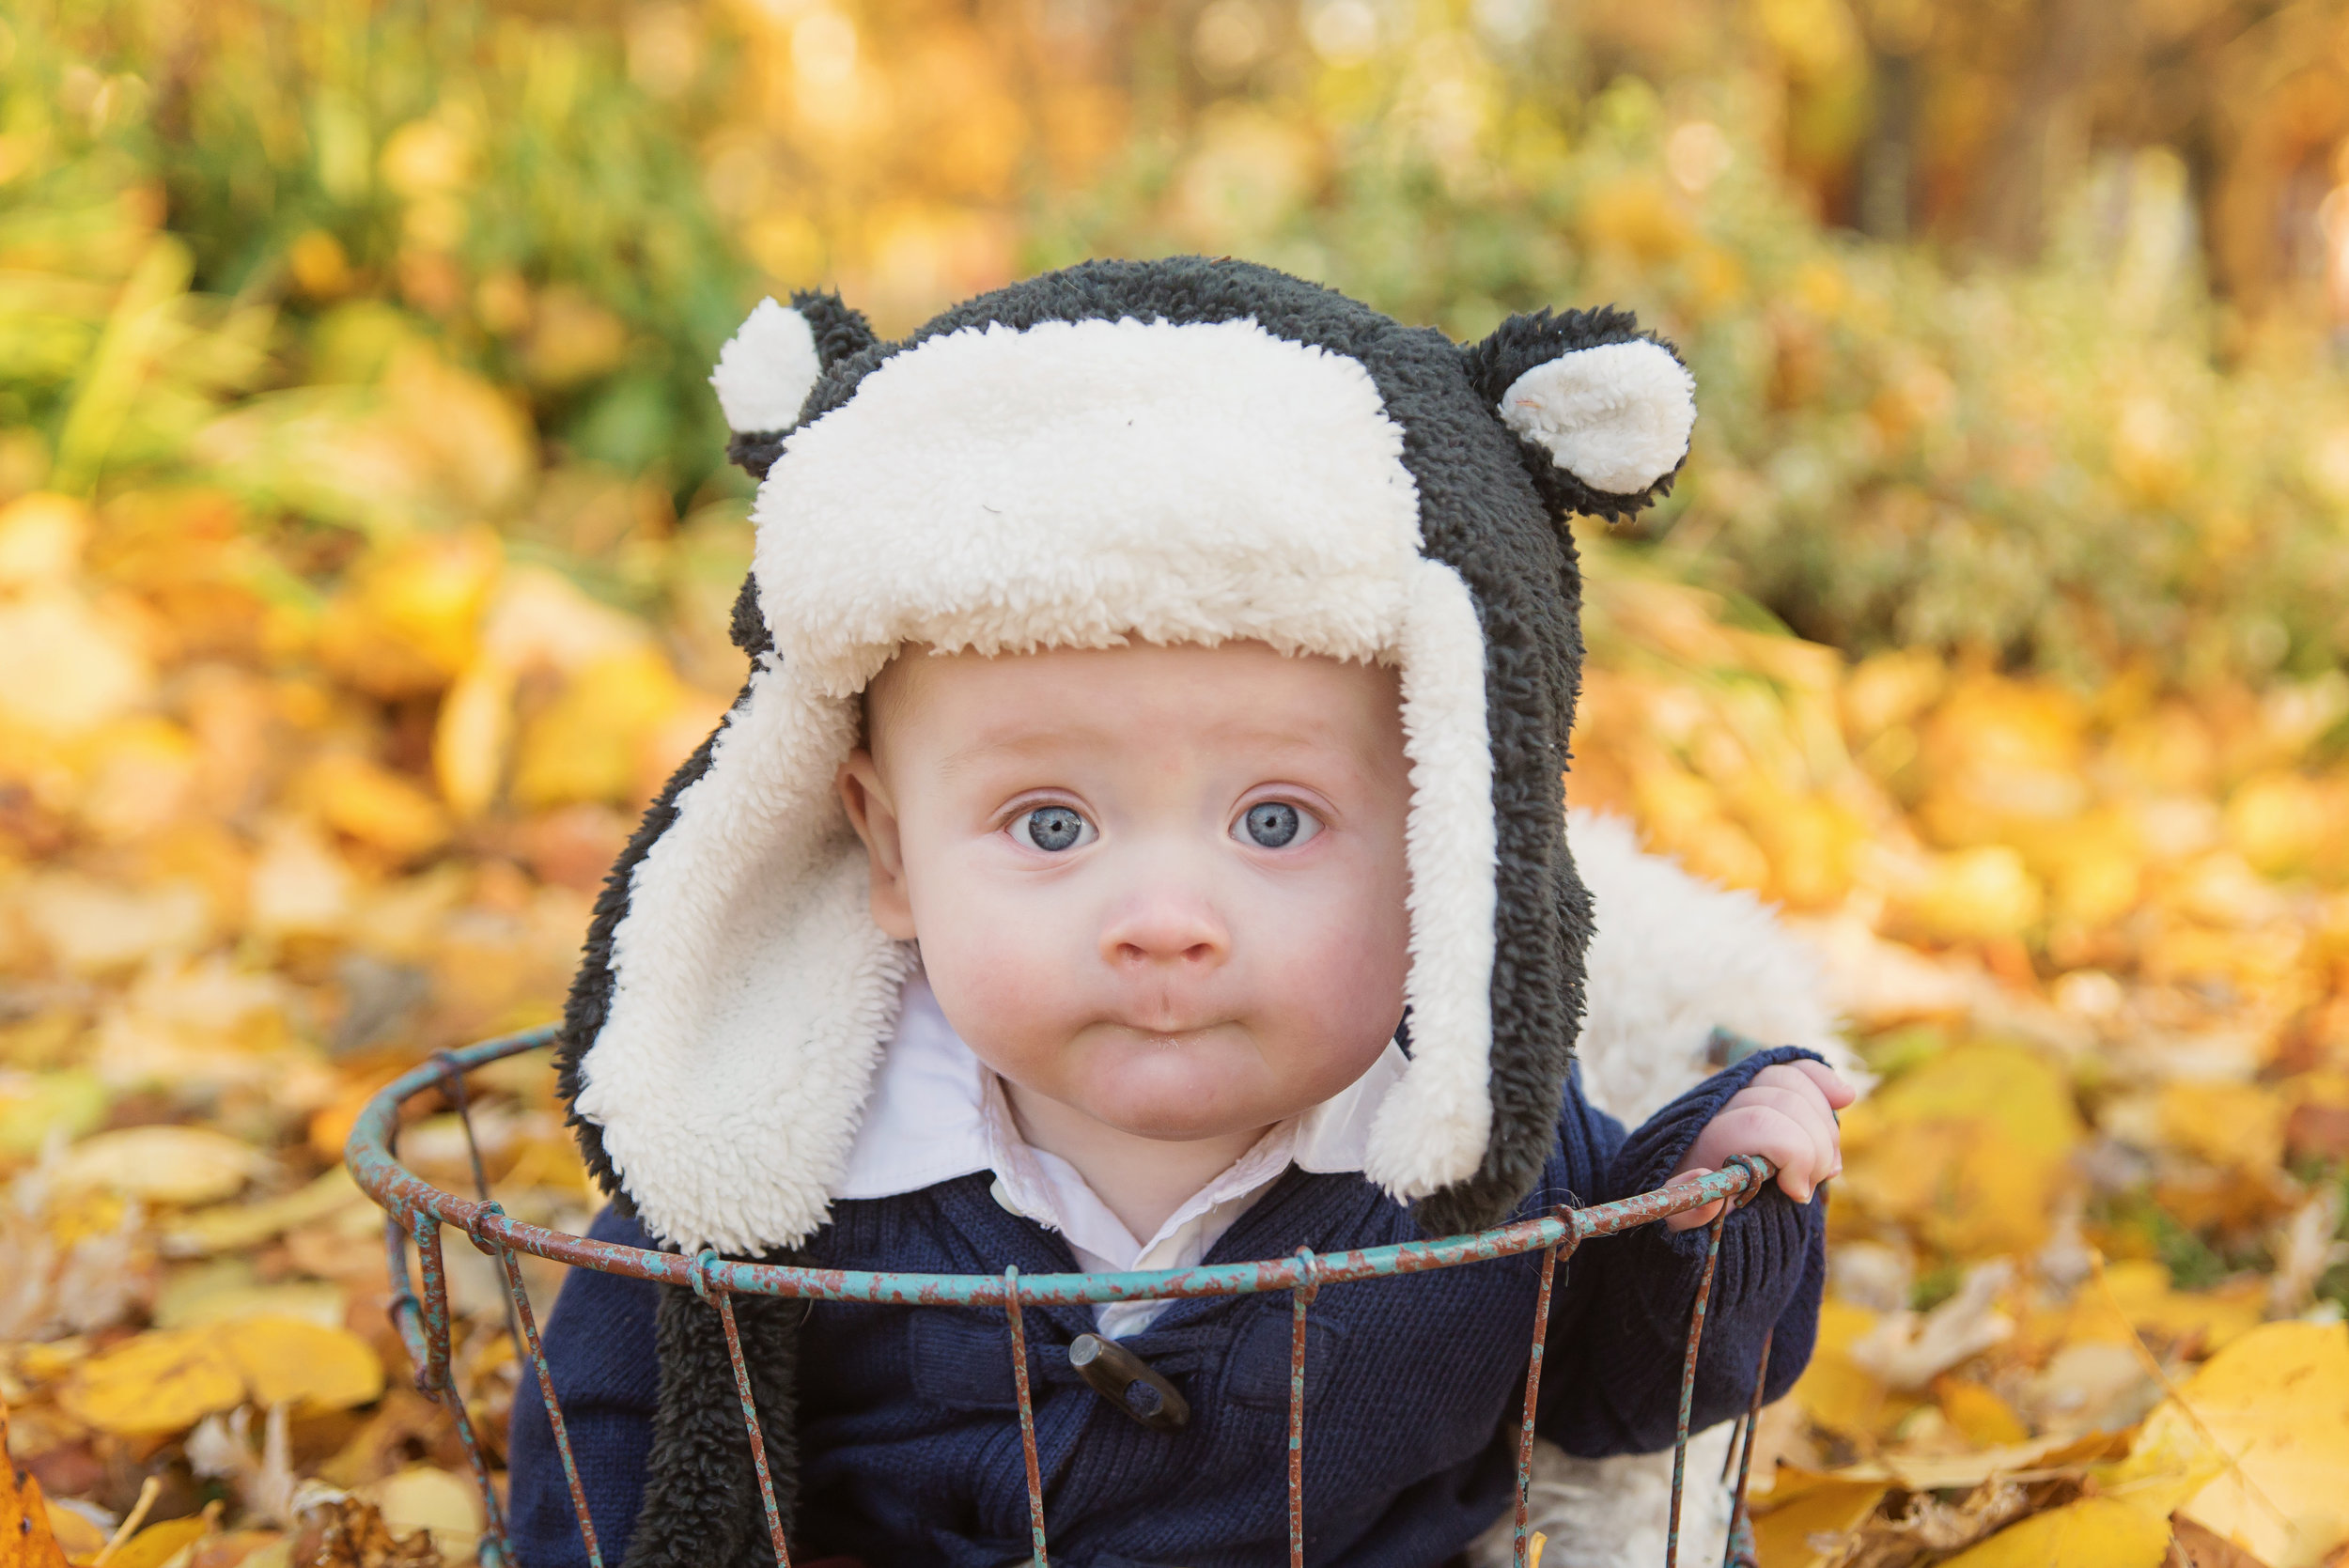 st-louis-fall-mini-sessions-2018-family-photographer-baby-in-basket-in-fall-leaves-with-winter-bear-hat.jpg